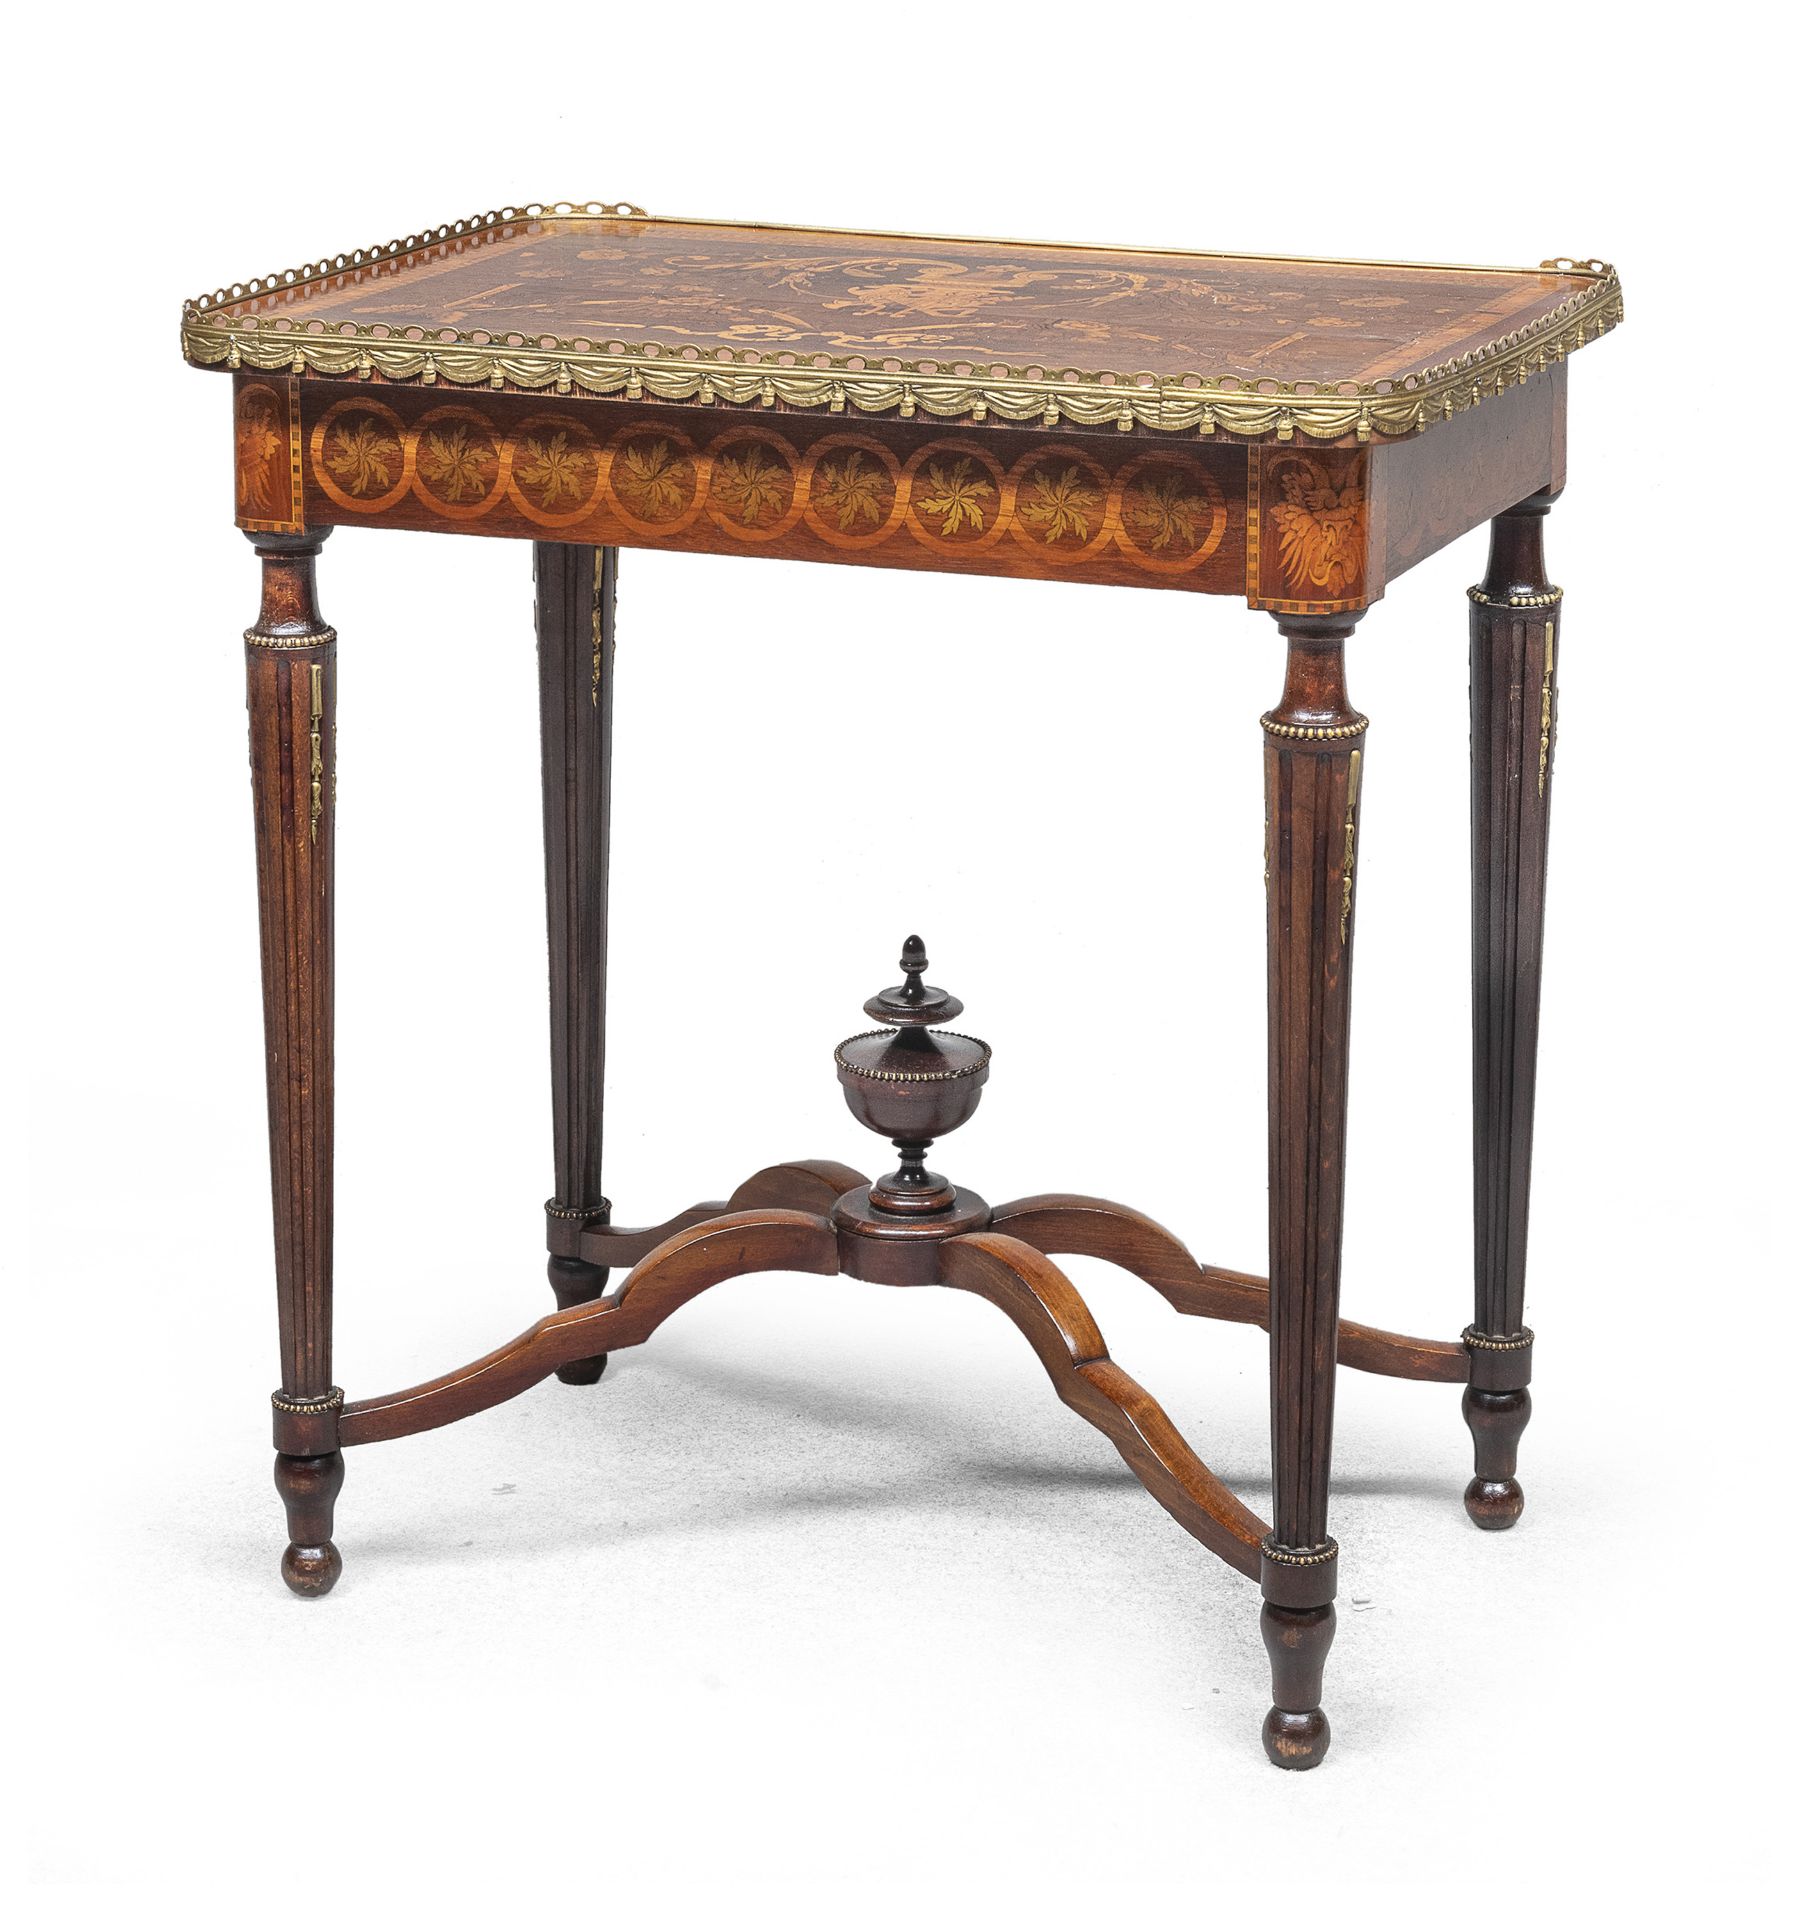 ROSEWOOD TABLE FRANCE 19TH CENTURY